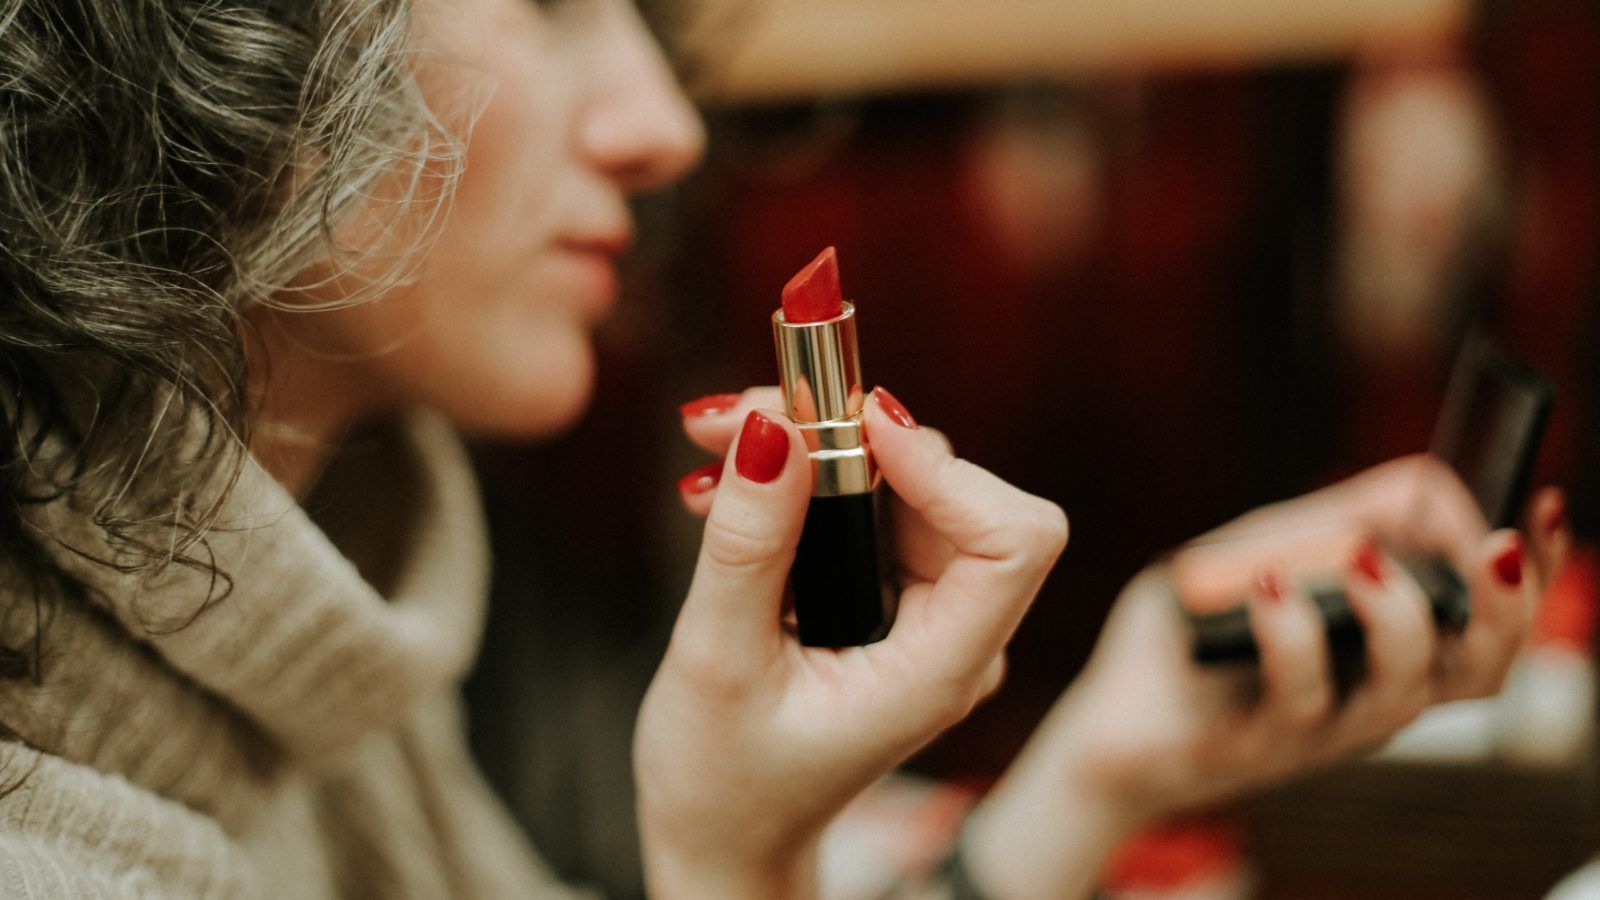 Smooch Away! These 17 smudge-proof lipsticks that last long